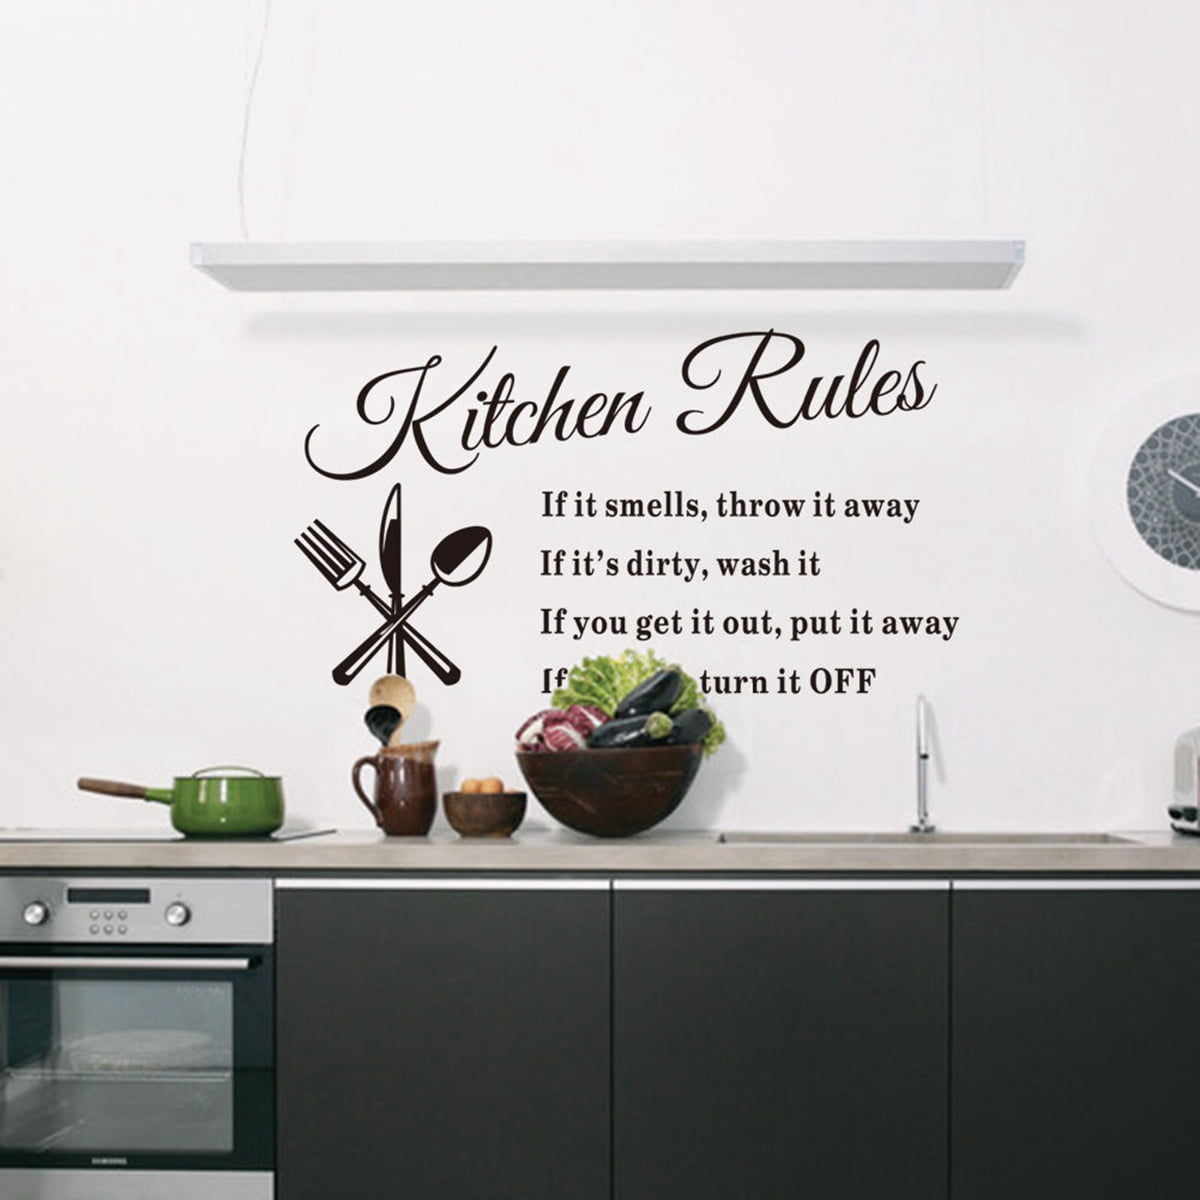 1pcs Wall Sticker Quote Mural Words Art Vinyl Home Kitchen Room Decal Decor 